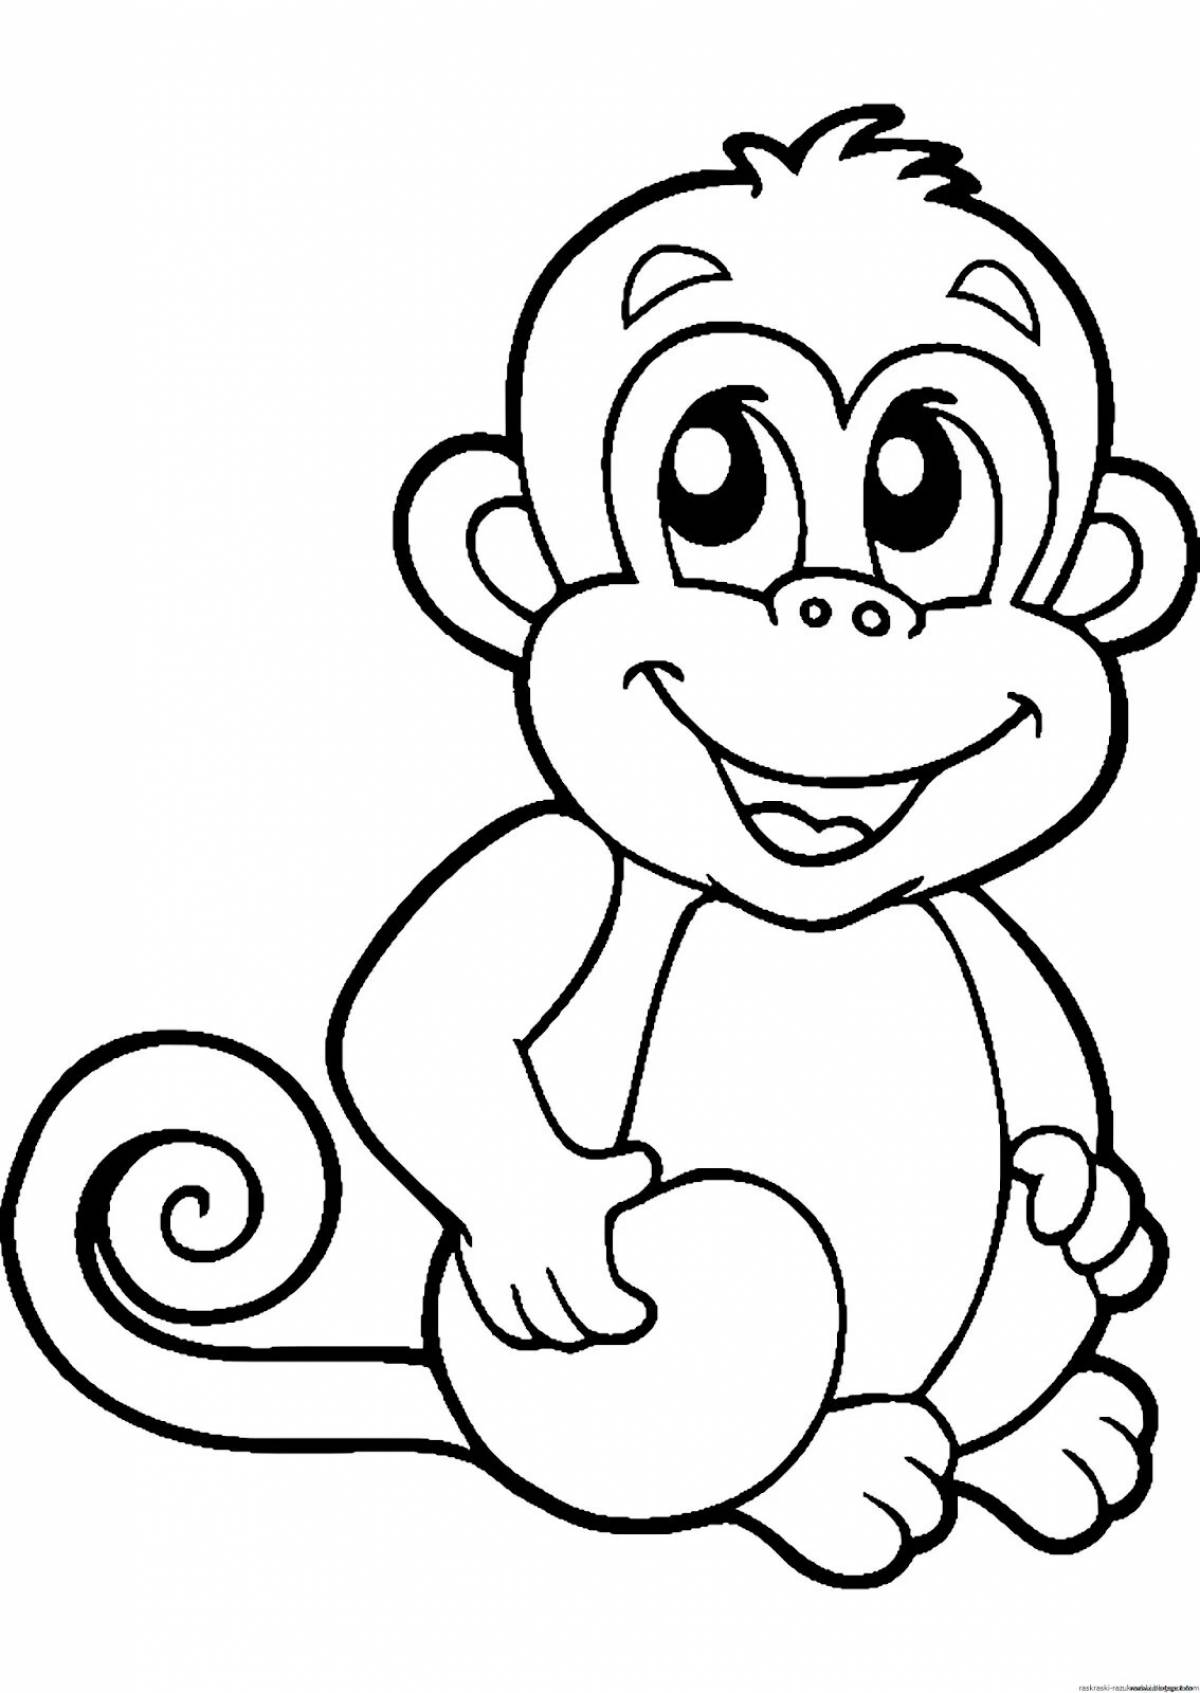 Monkey for children 4 5 years old #5